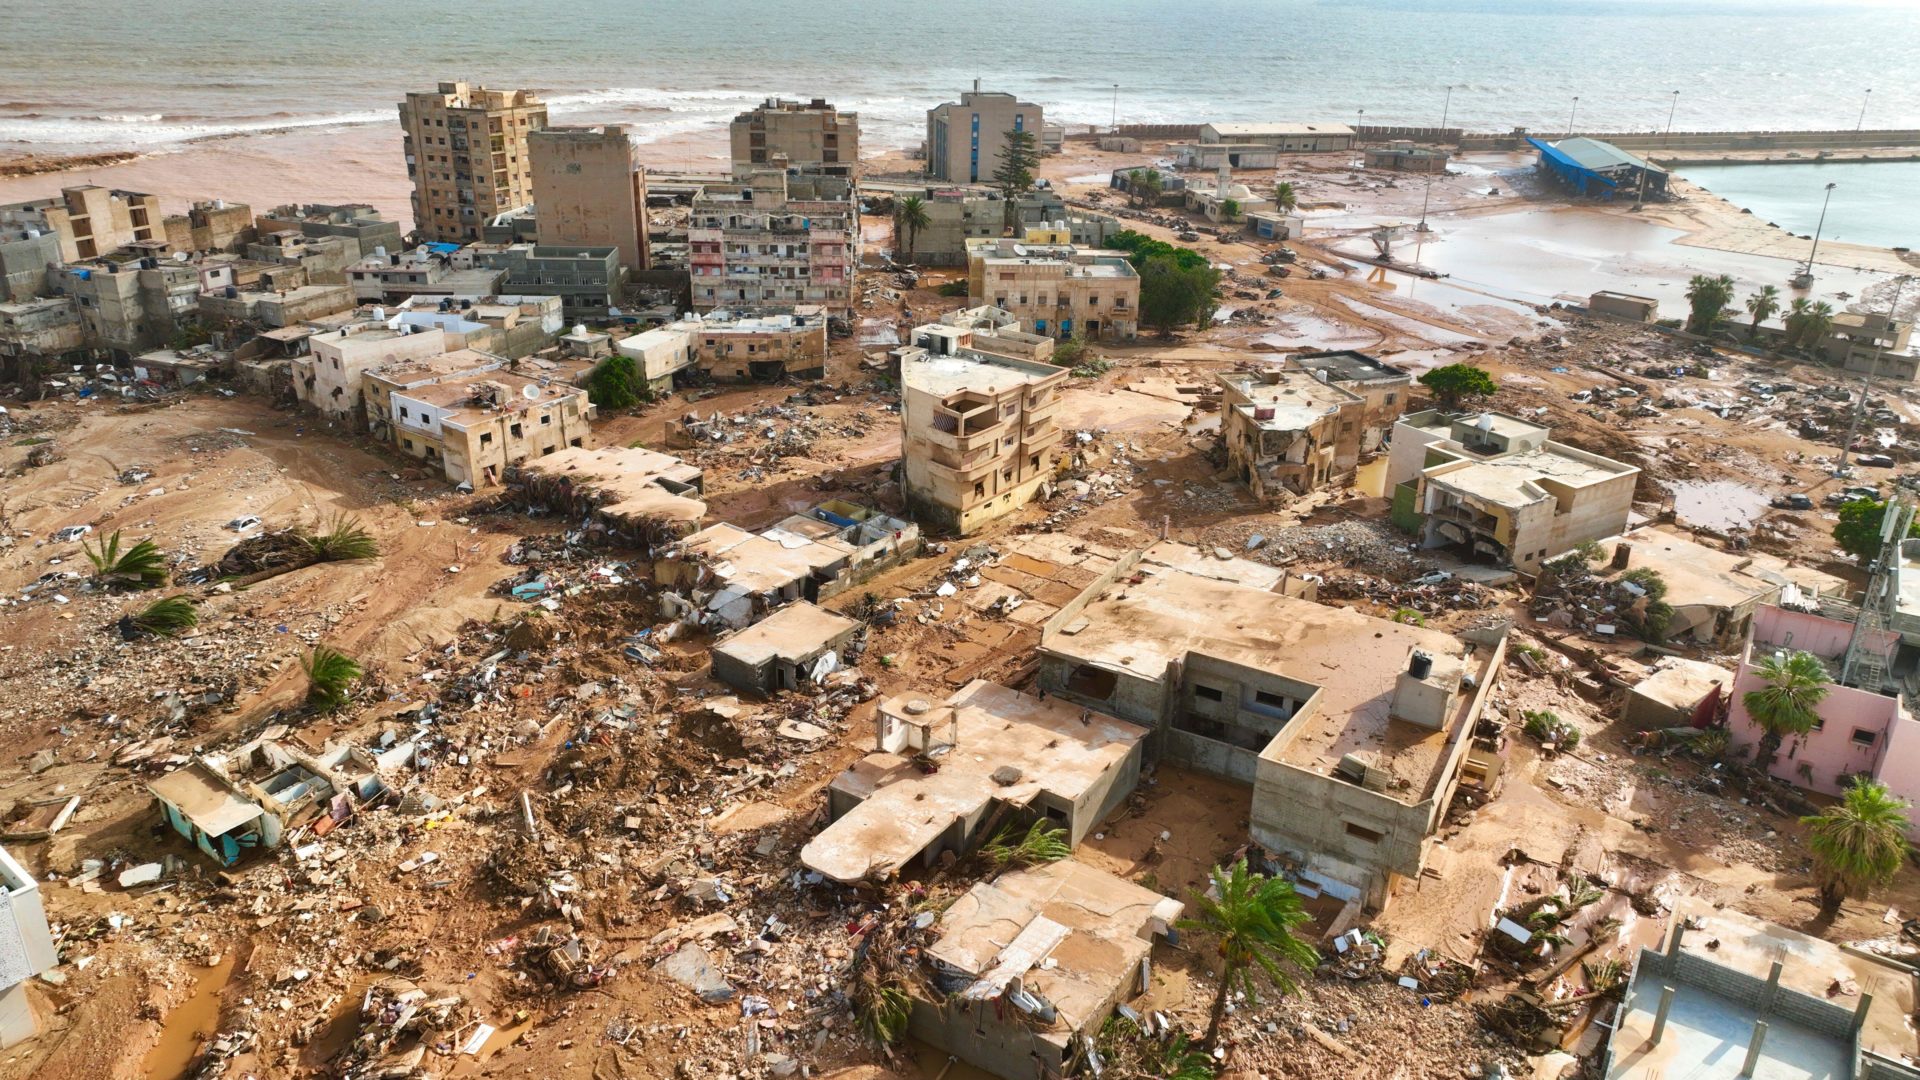 2RTCWCP A general view of the city of Derna is seen on Tuesday, Sept. 12., 2023. Mediterranean storm Daniel caused devastating floods in Libya that broke dams and swept away entire neighborhoods in multiple coastal towns, the destruction appeared greatest in Derna city. (AP Photo/Jamal Alkomaty)